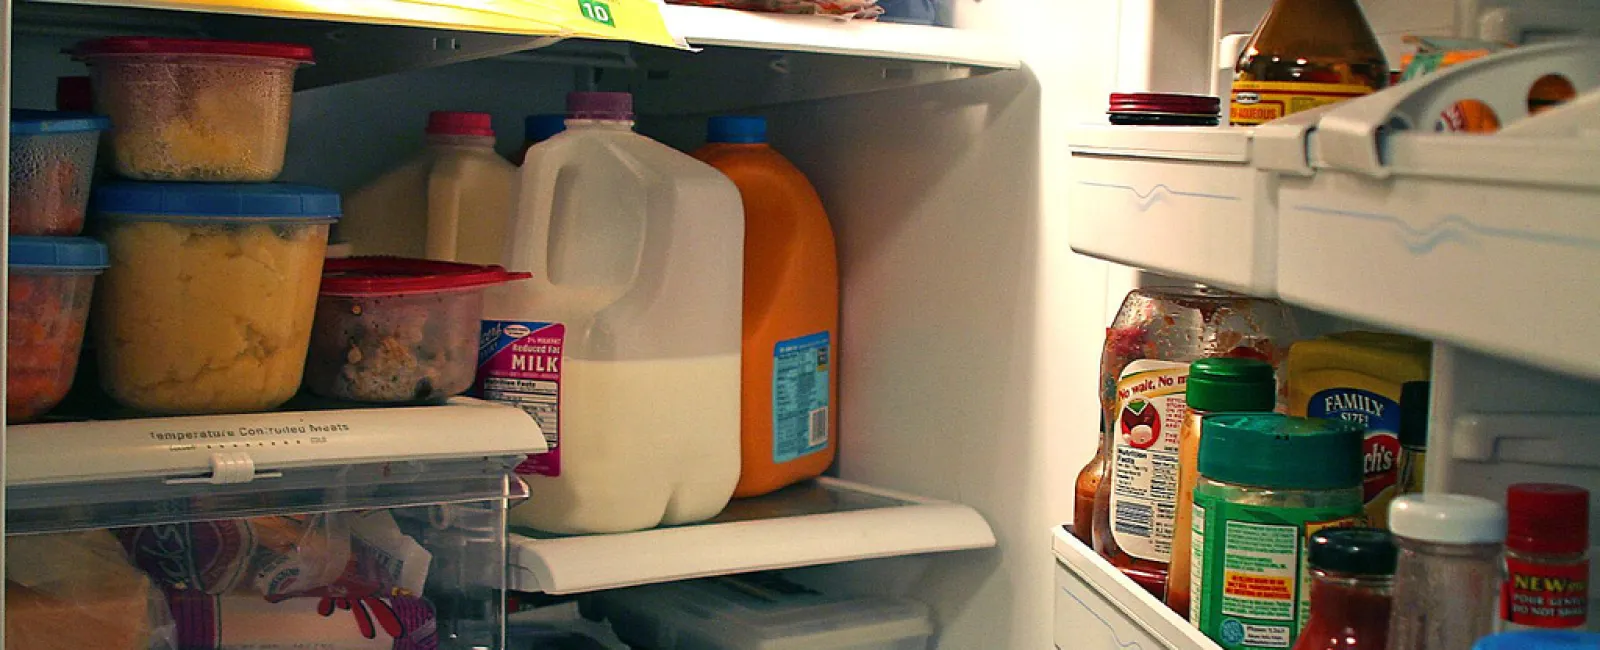 Clean Out Your Refrigerator and Perform a Walkthrough